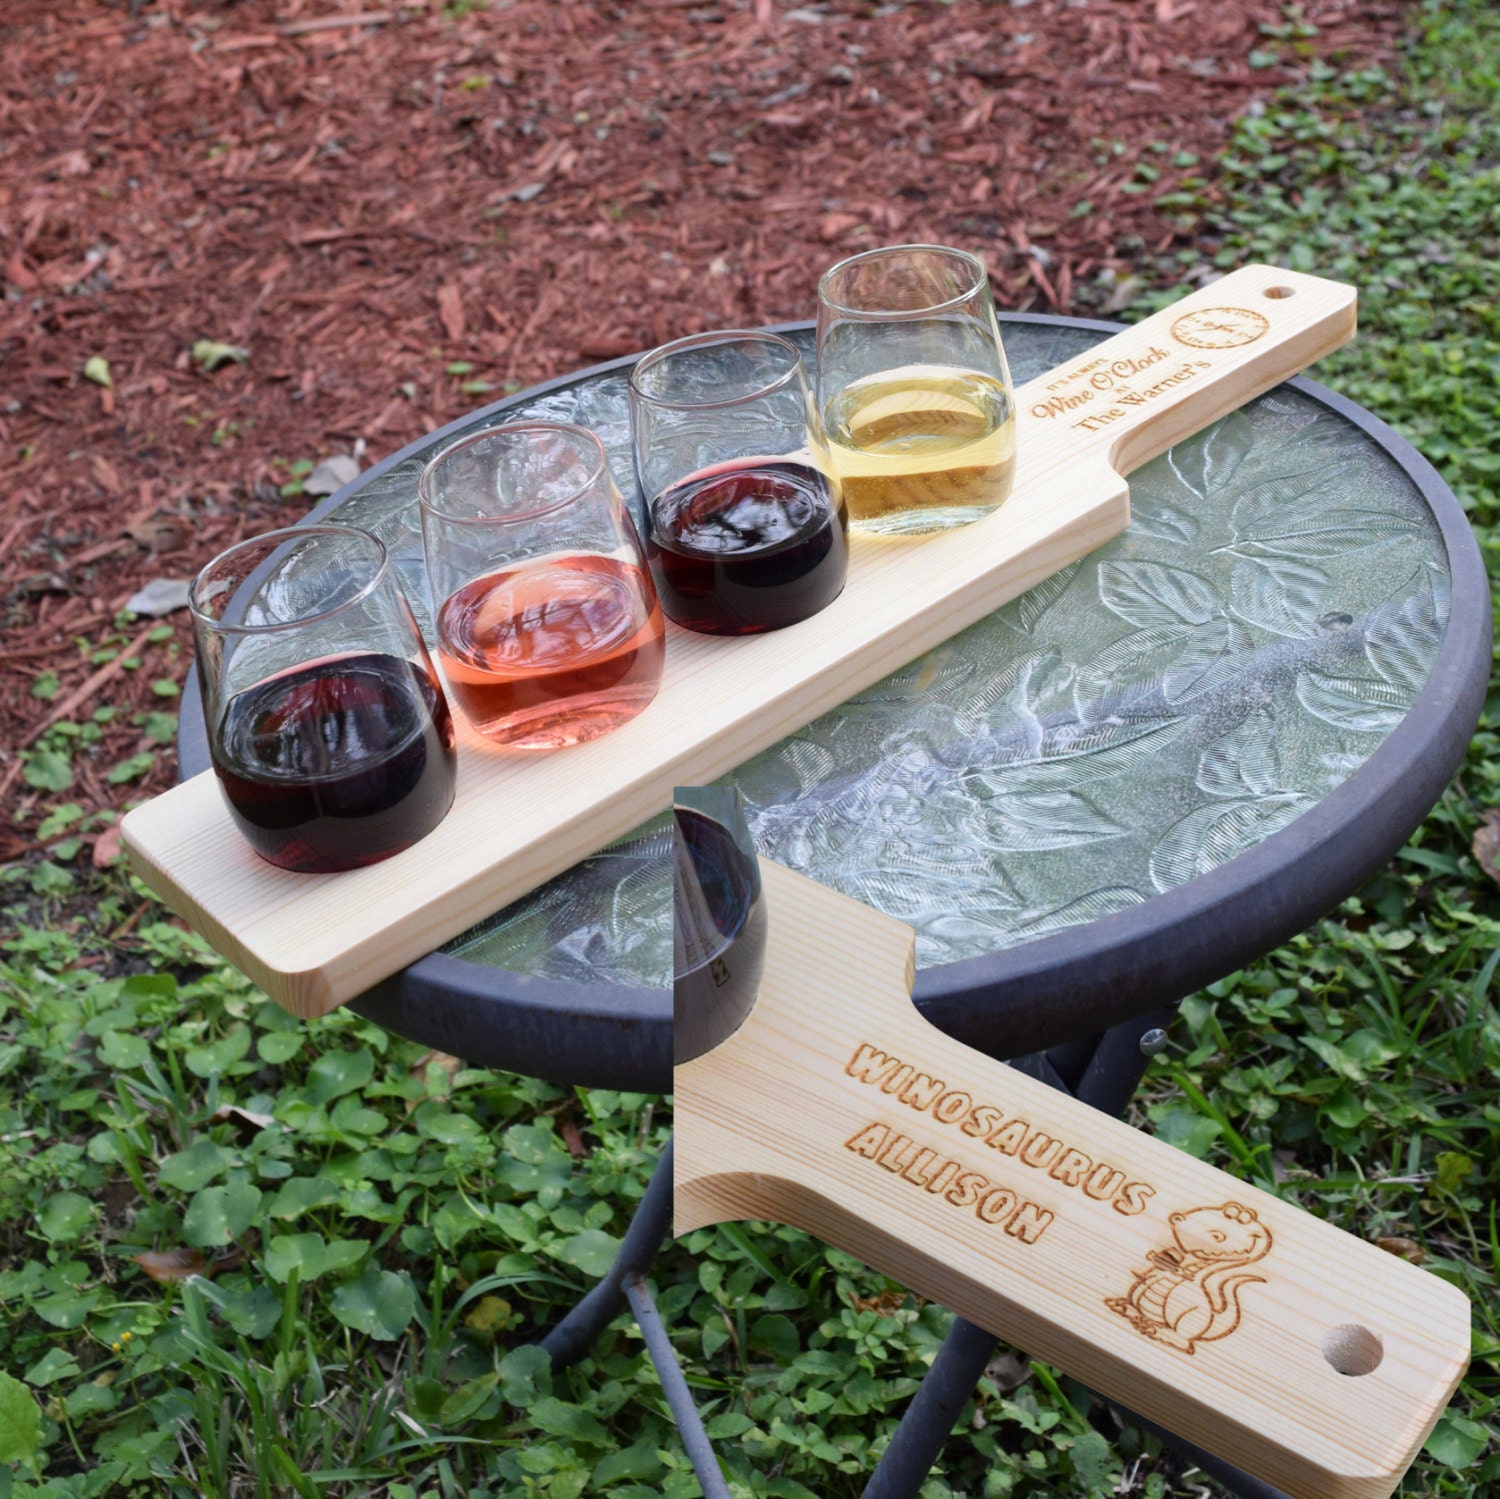 WINE FLIGHT HOLDER  Experience your rooted moment